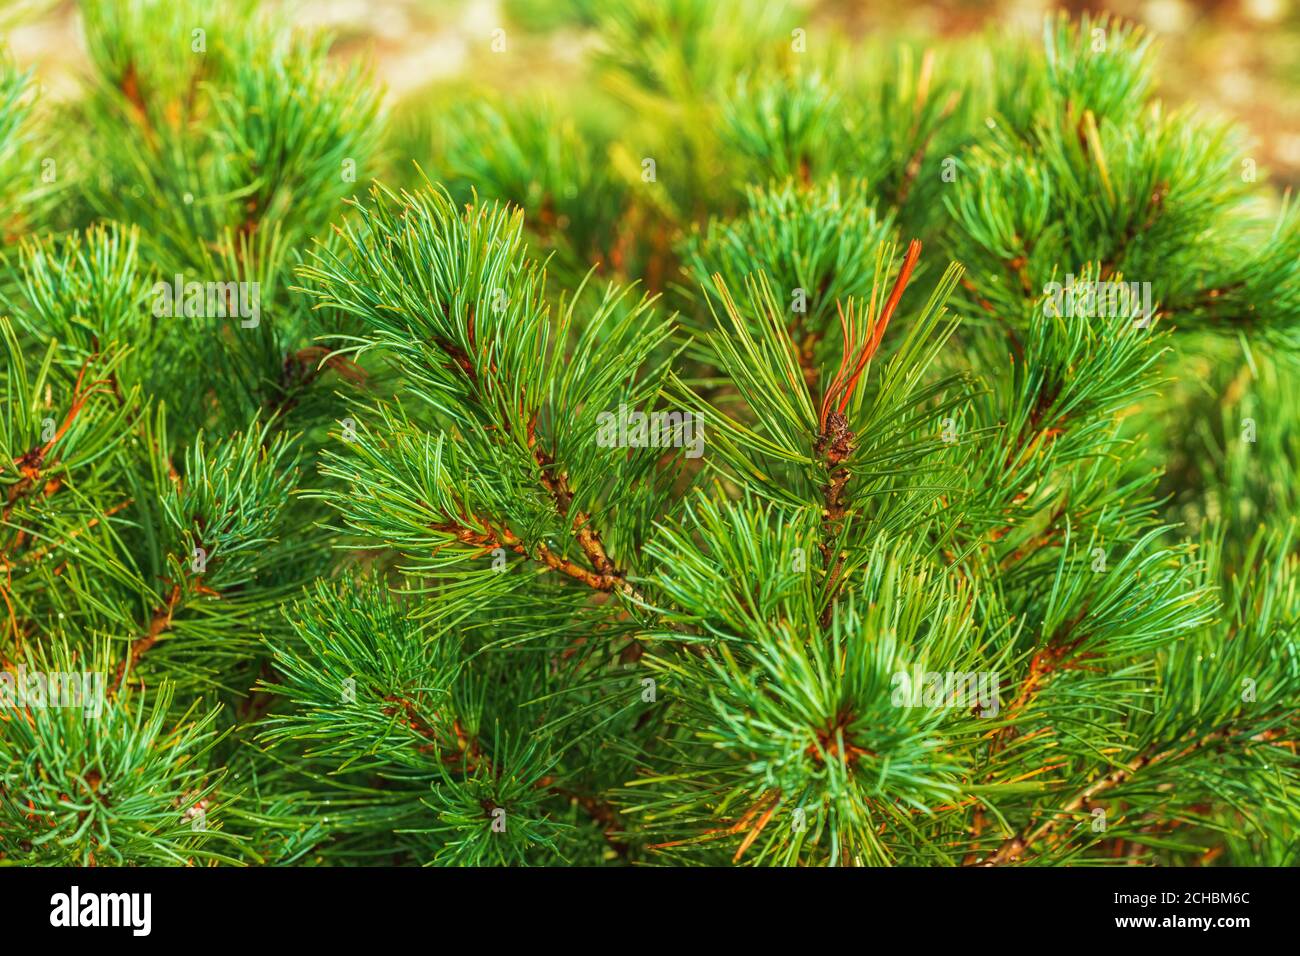 Needles of bush Japanese Stone Pine Pinus Pumila. Natural medicinal plant used in traditional and folk medicine. Christmas mood. Close-up view Stock Photo